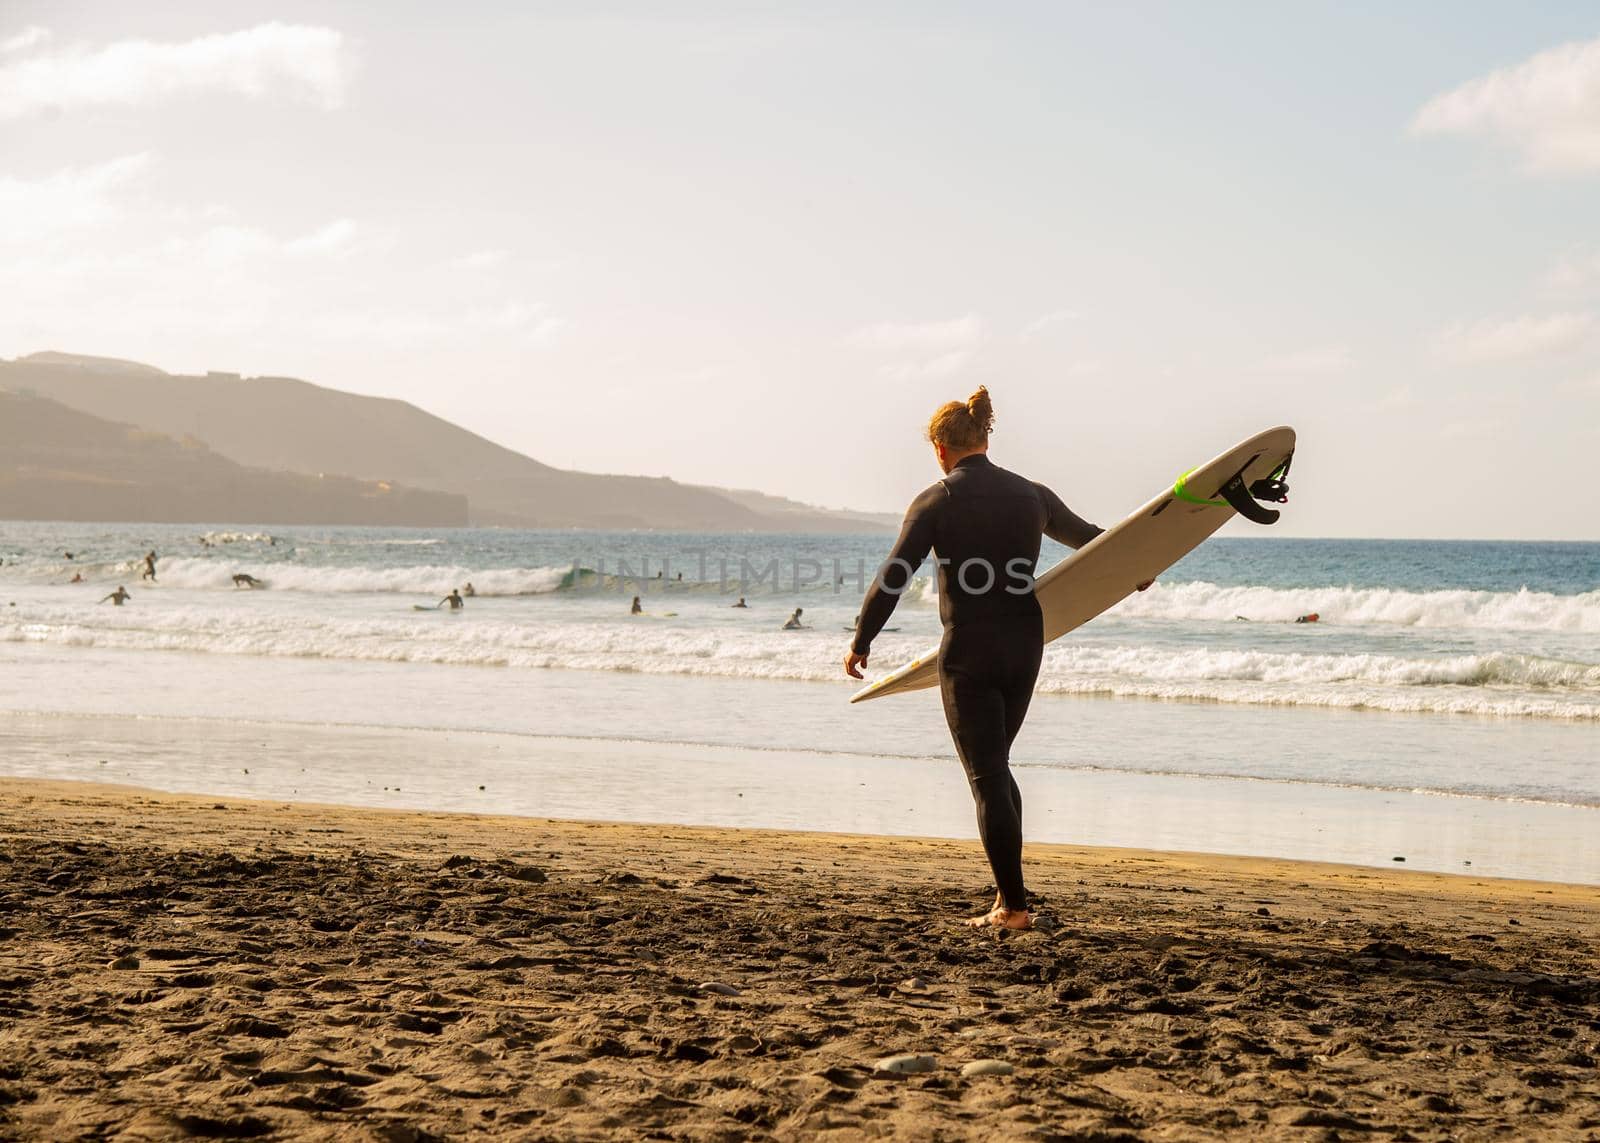 17 February 2022 Beach of "Las Canteras" in Las Palmas on Grand Canary Island - Second largest City Beach in the world.A very good beach for surfers and surf schools